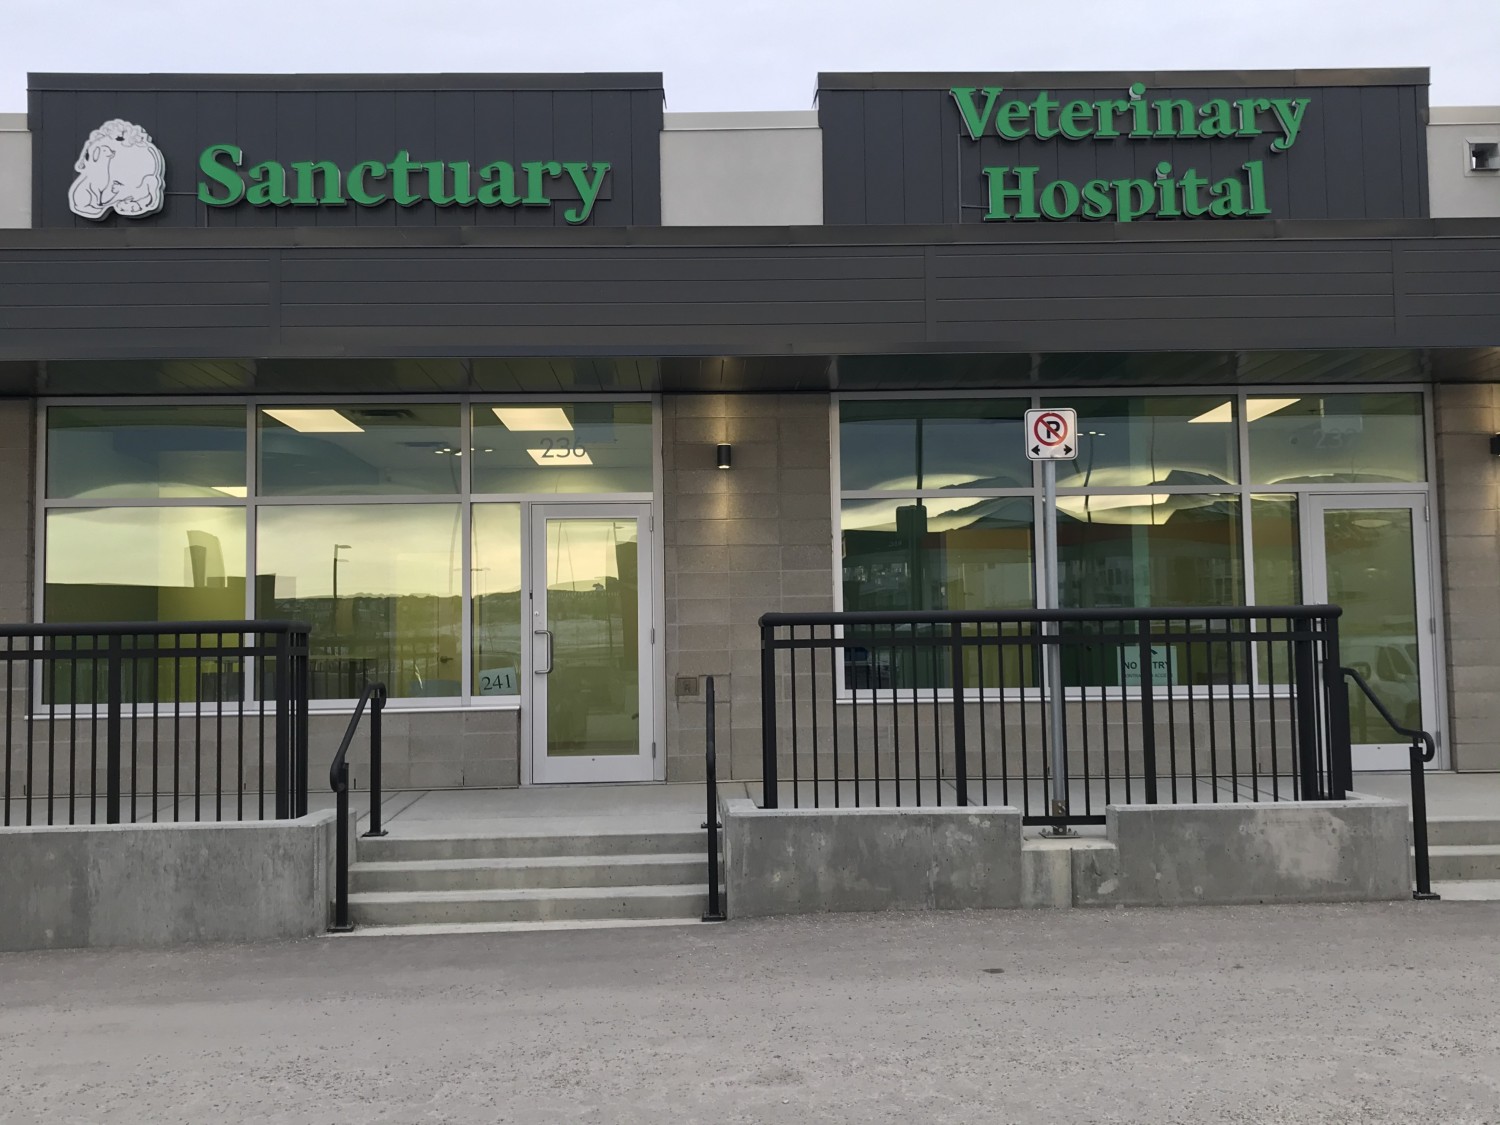 Sanctuary Veterinary Hospital - Our Practice